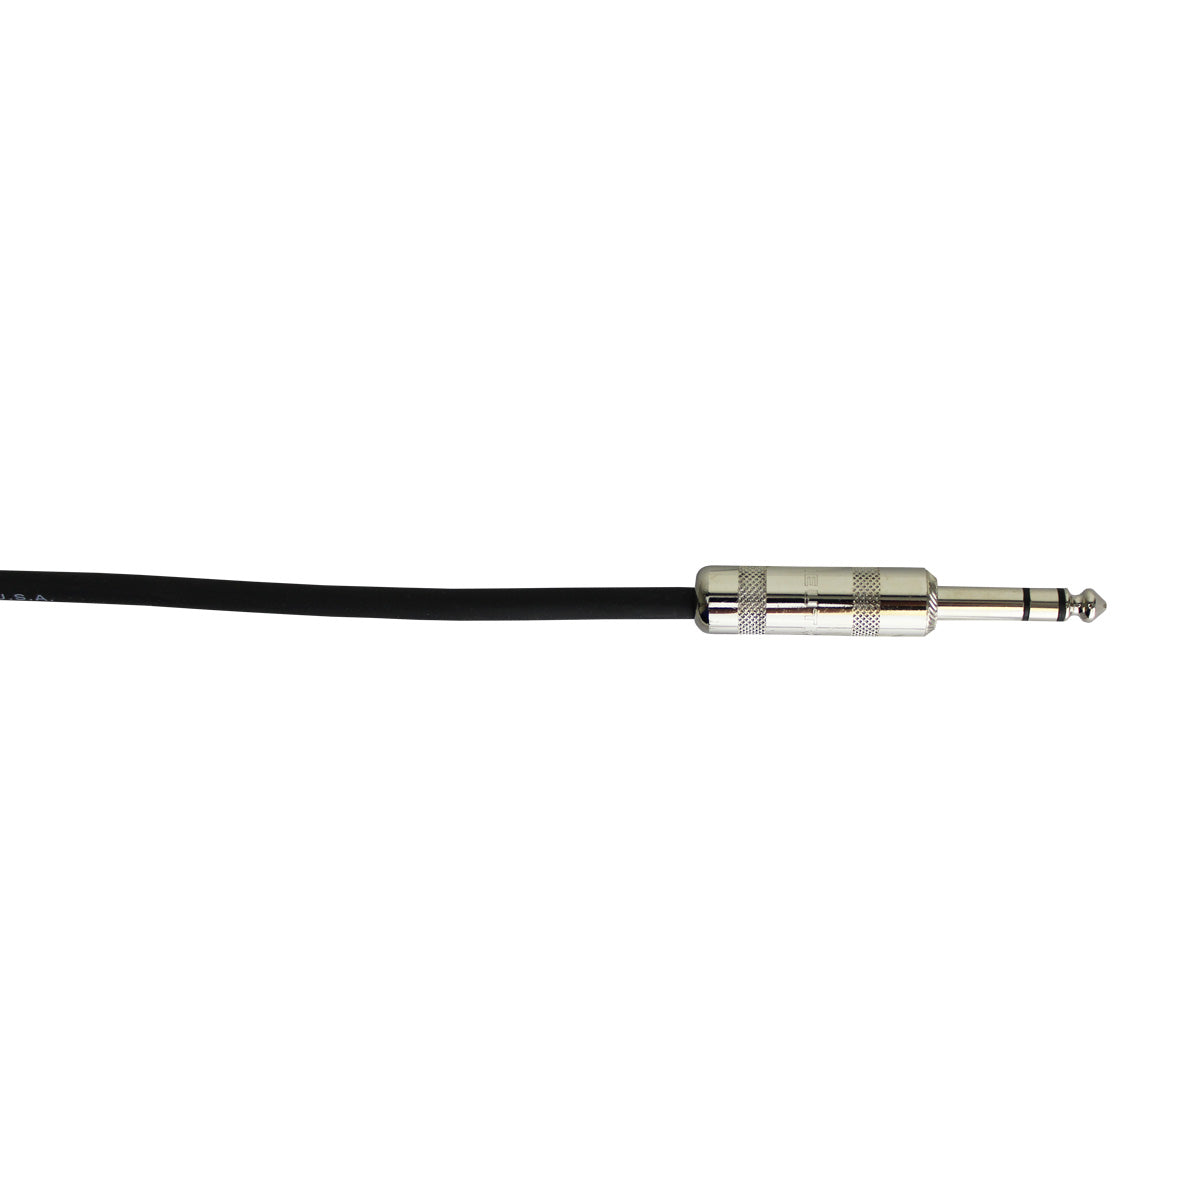 ProFormance USA Balanced Line Cable, 1/4 in. to XLR - 25 ft.